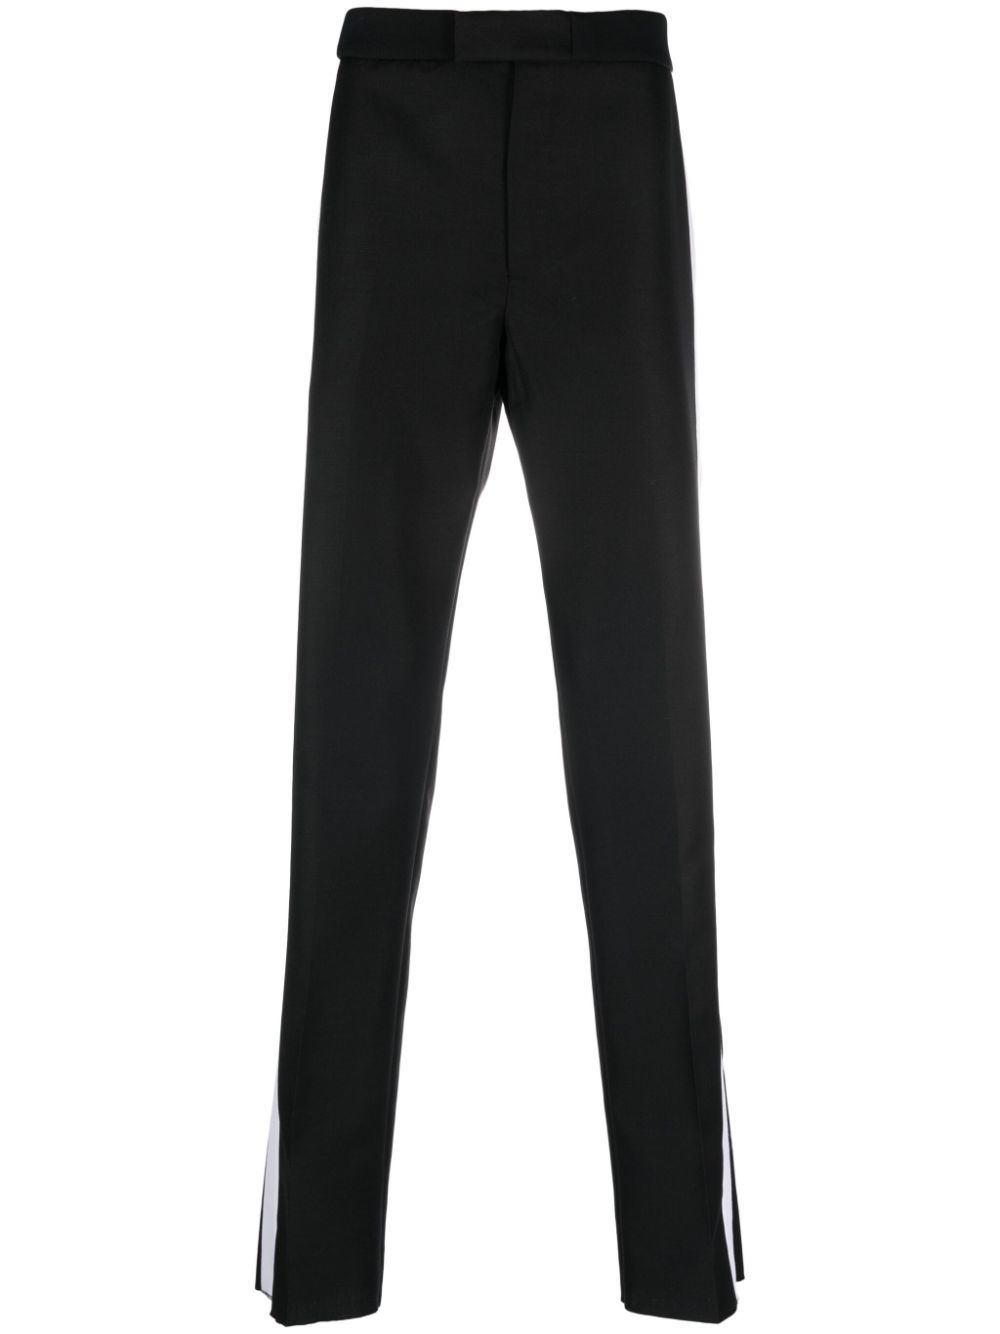 ALEXANDER MCQUEEN STRIPED TAILORED TROUSERS